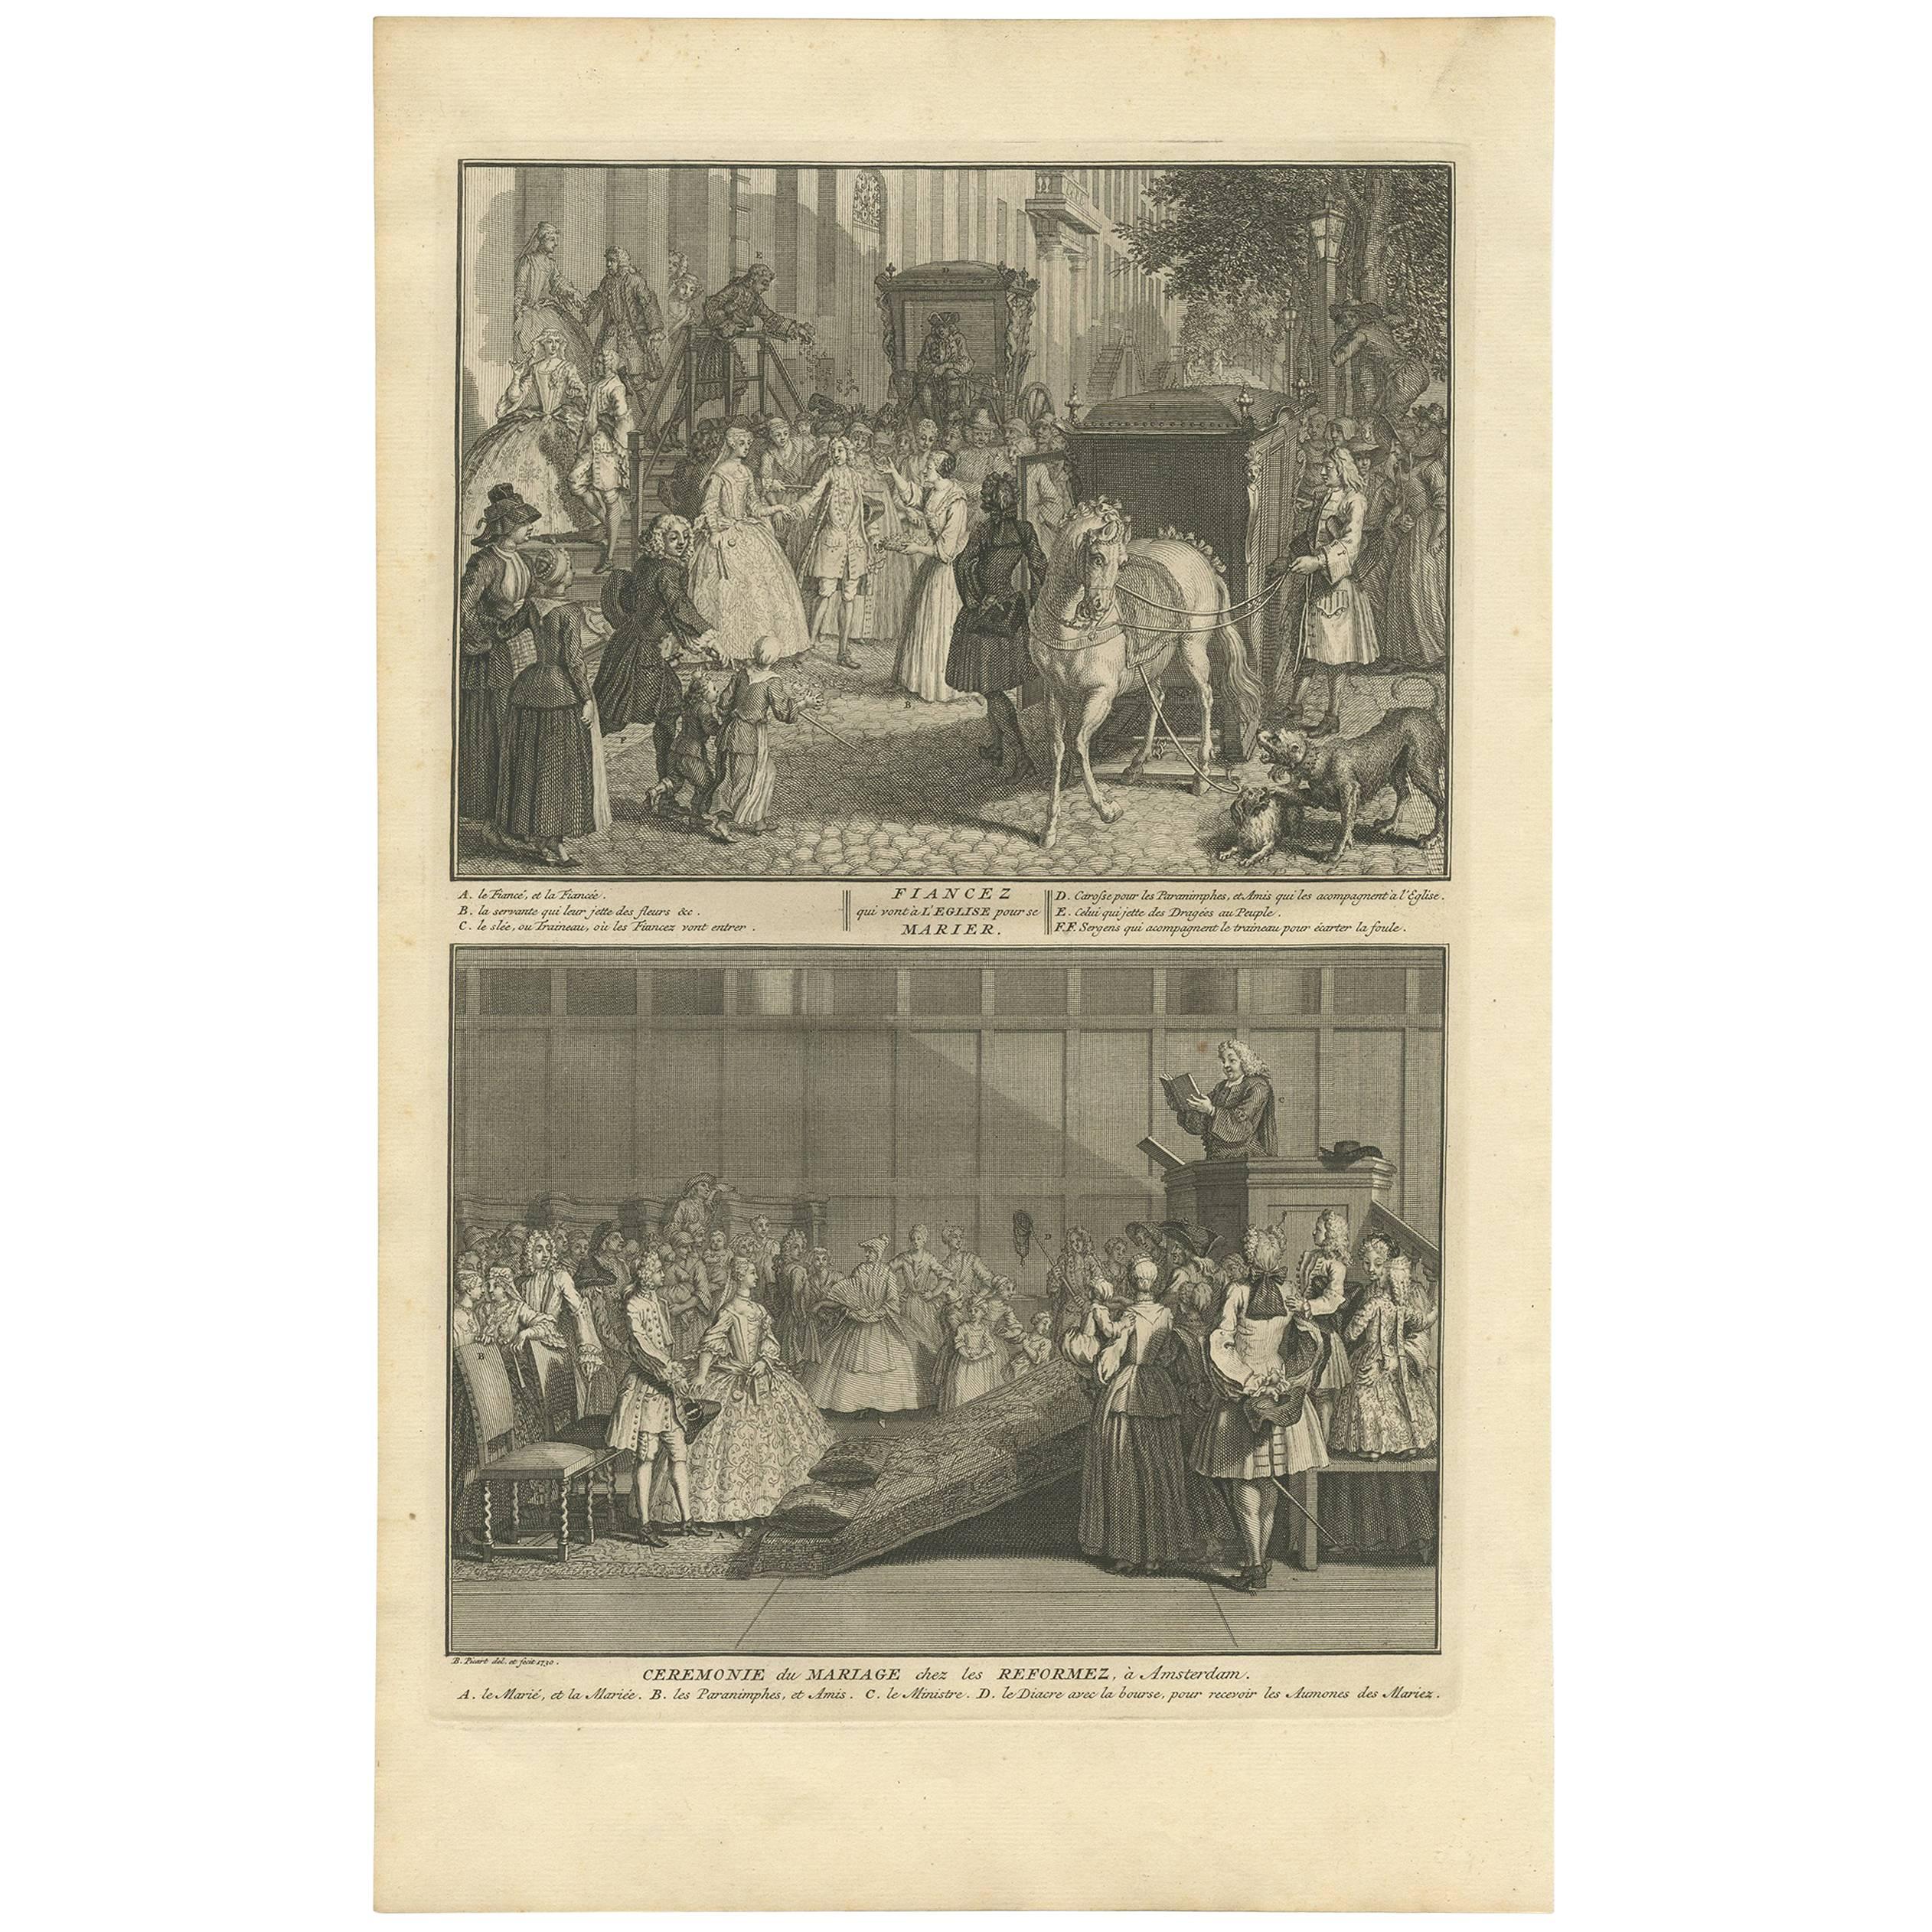 Antique Print of Marriage Ceremonies in Amsterdam 'The Netherlands' by B. Picart